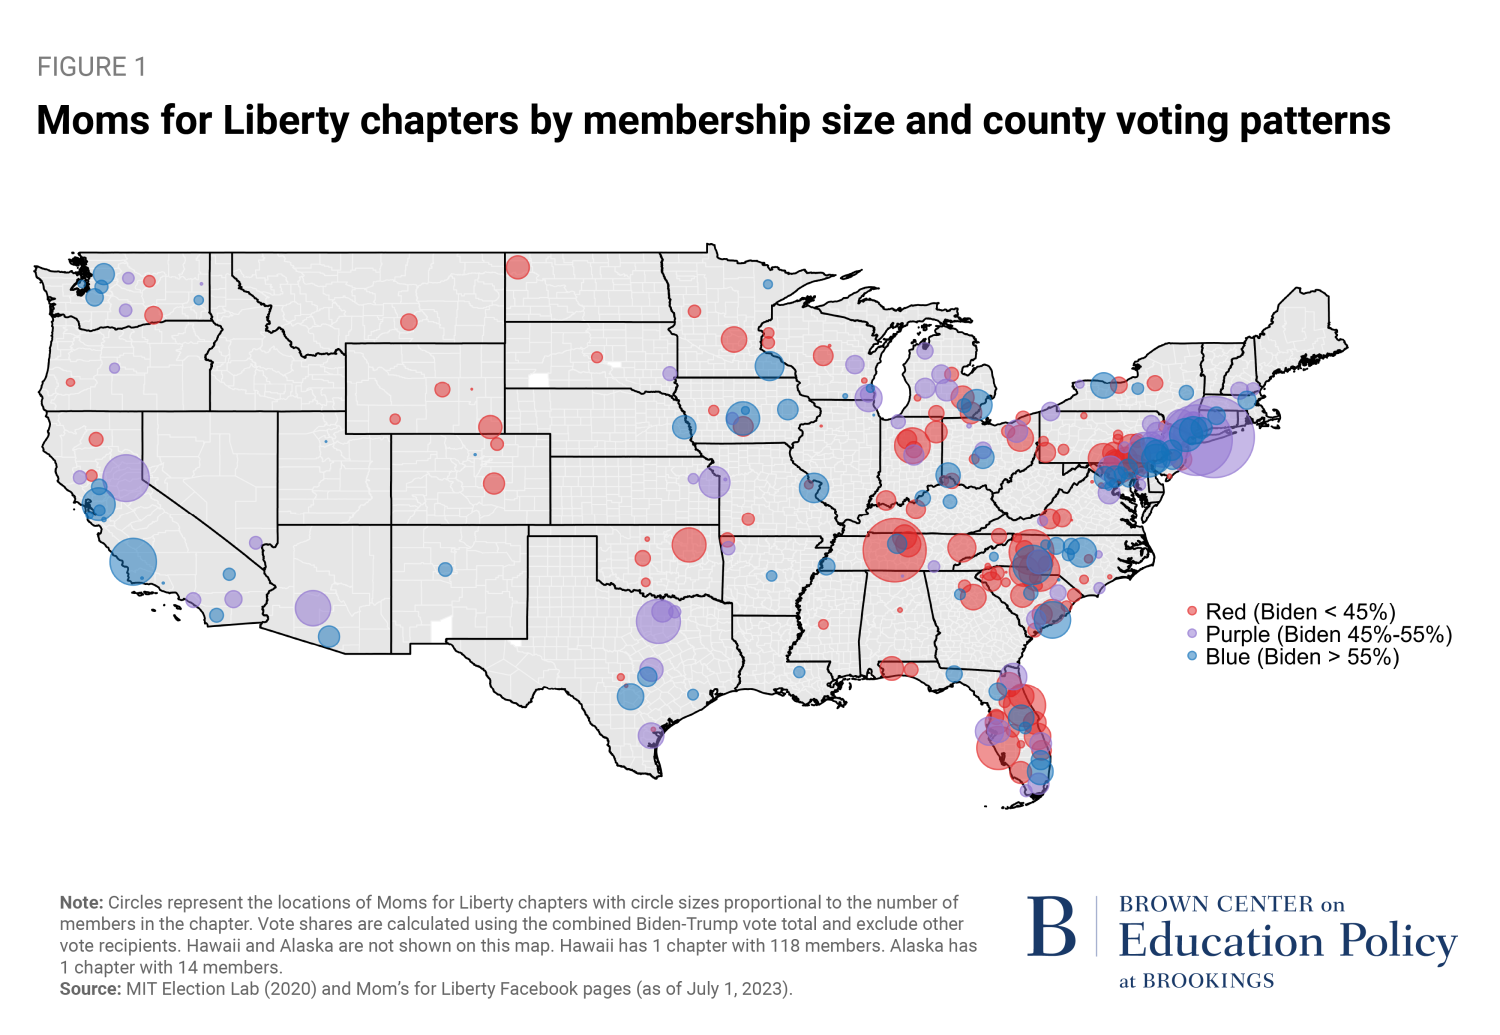 Moms for Liberty chapters by membership size and county voting patterns